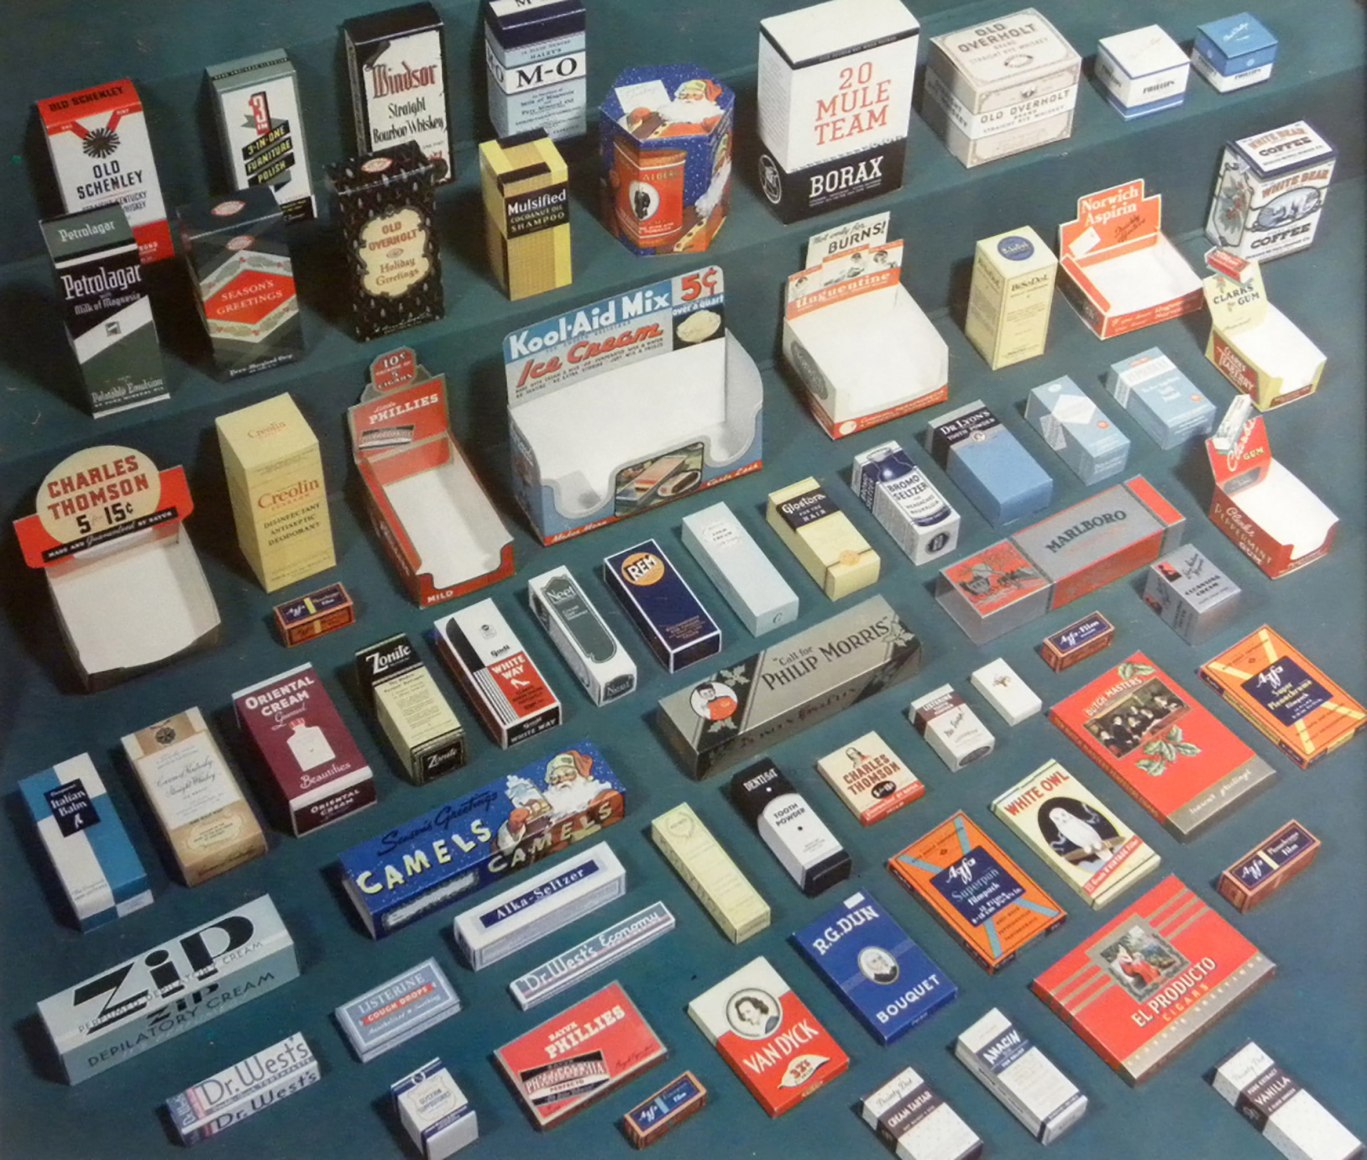 Harold Haliday Costain, Advertising Display &amp; Packaging, ​1937. Packaging for various convenience items (cigarettes, aspirin, coffee, etc.) arranged on a blue surface.